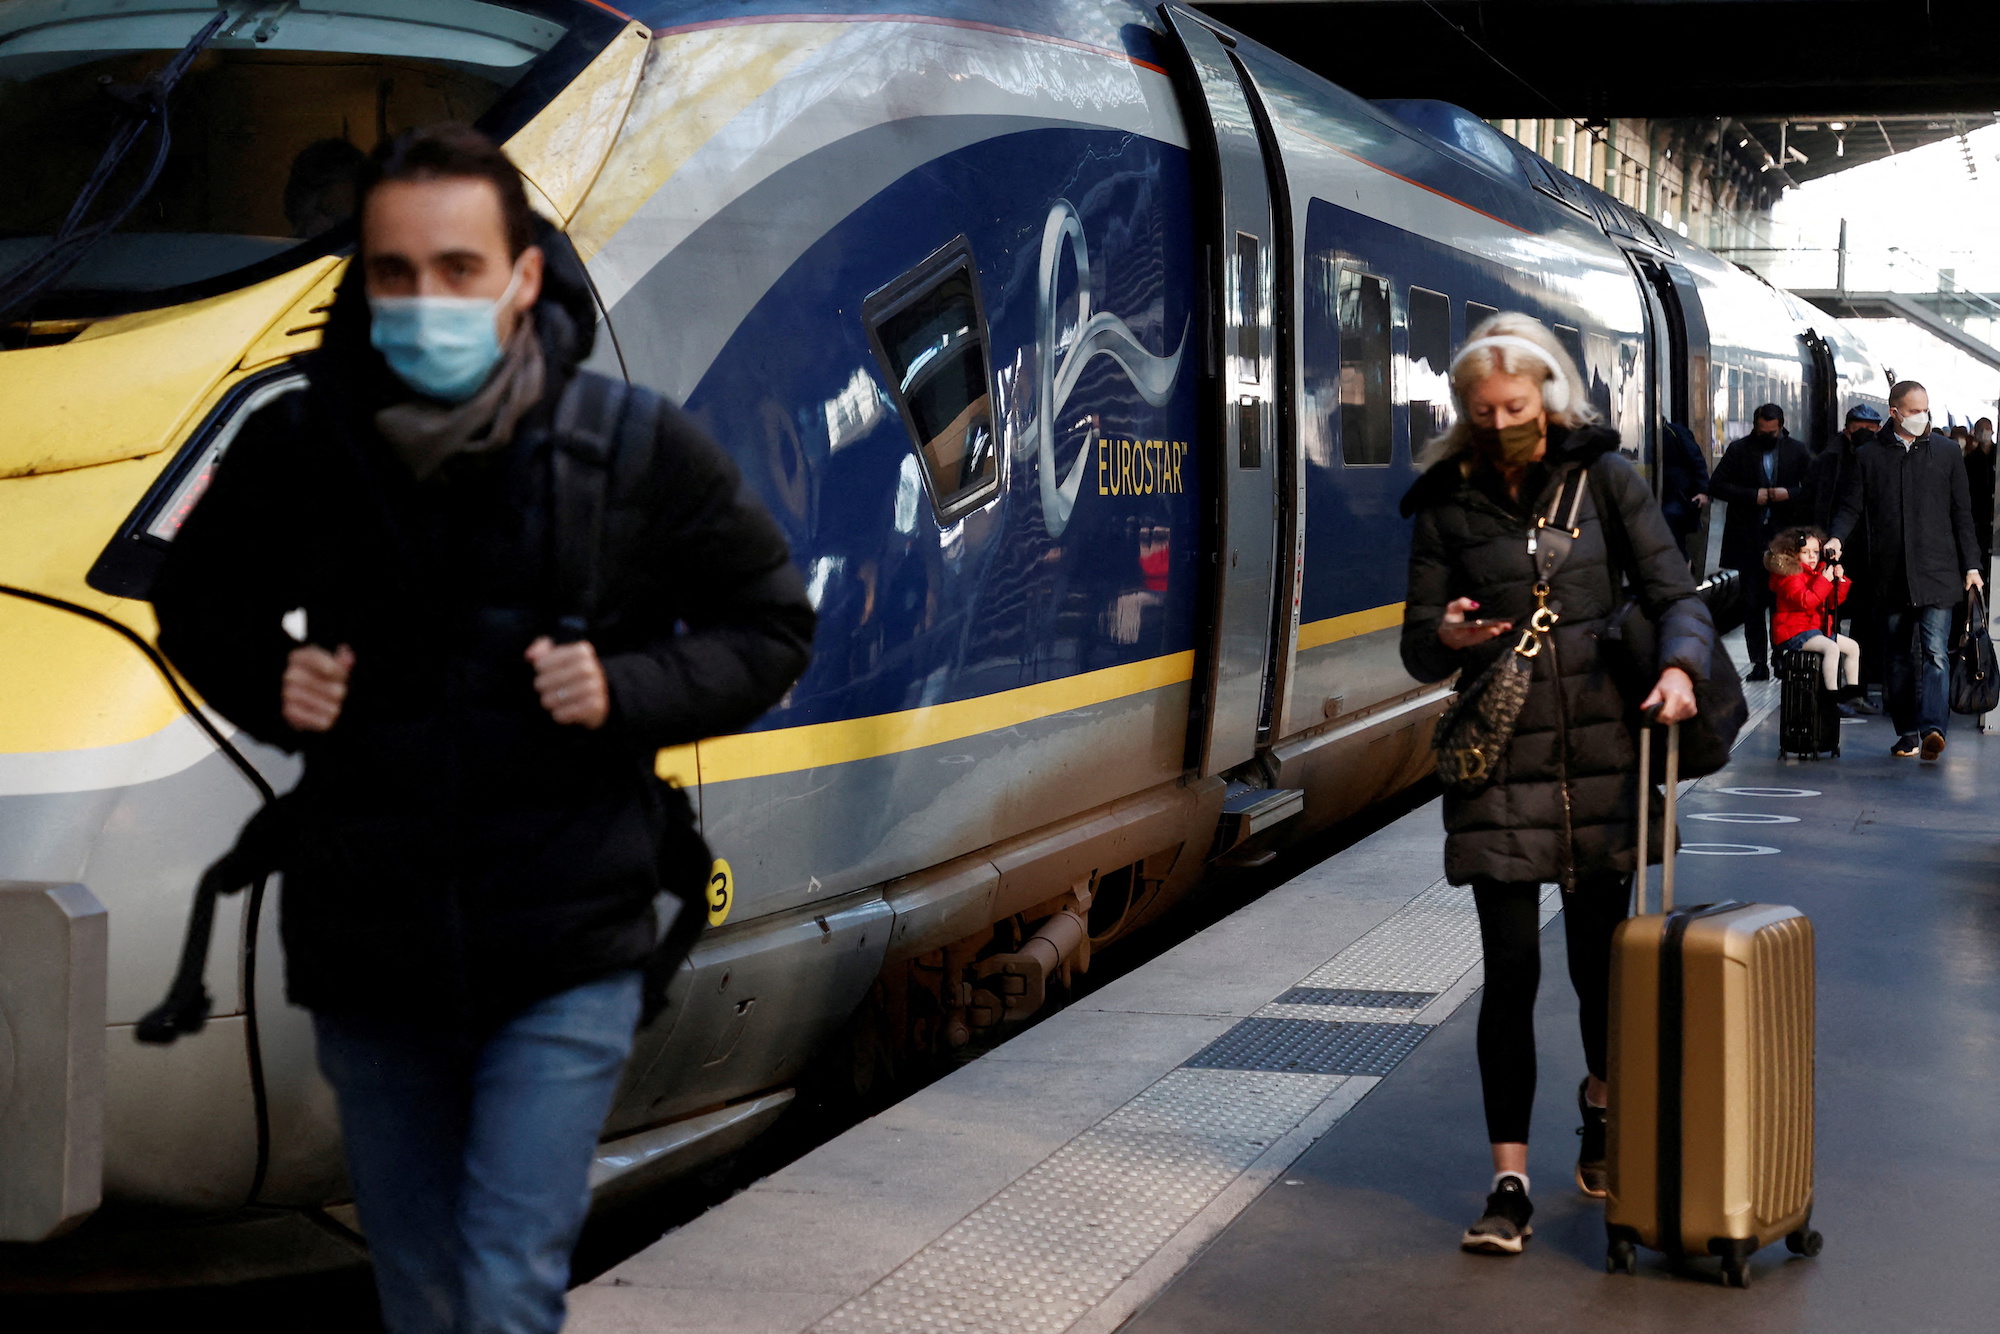 FILE PHOTO: Passengers arrive at the Eurostar terminal at Gare du Nord train station, after France eased travel restrictions for travelers from Britain amid the spread of the coronavirus disease (COVID-19) pandemic